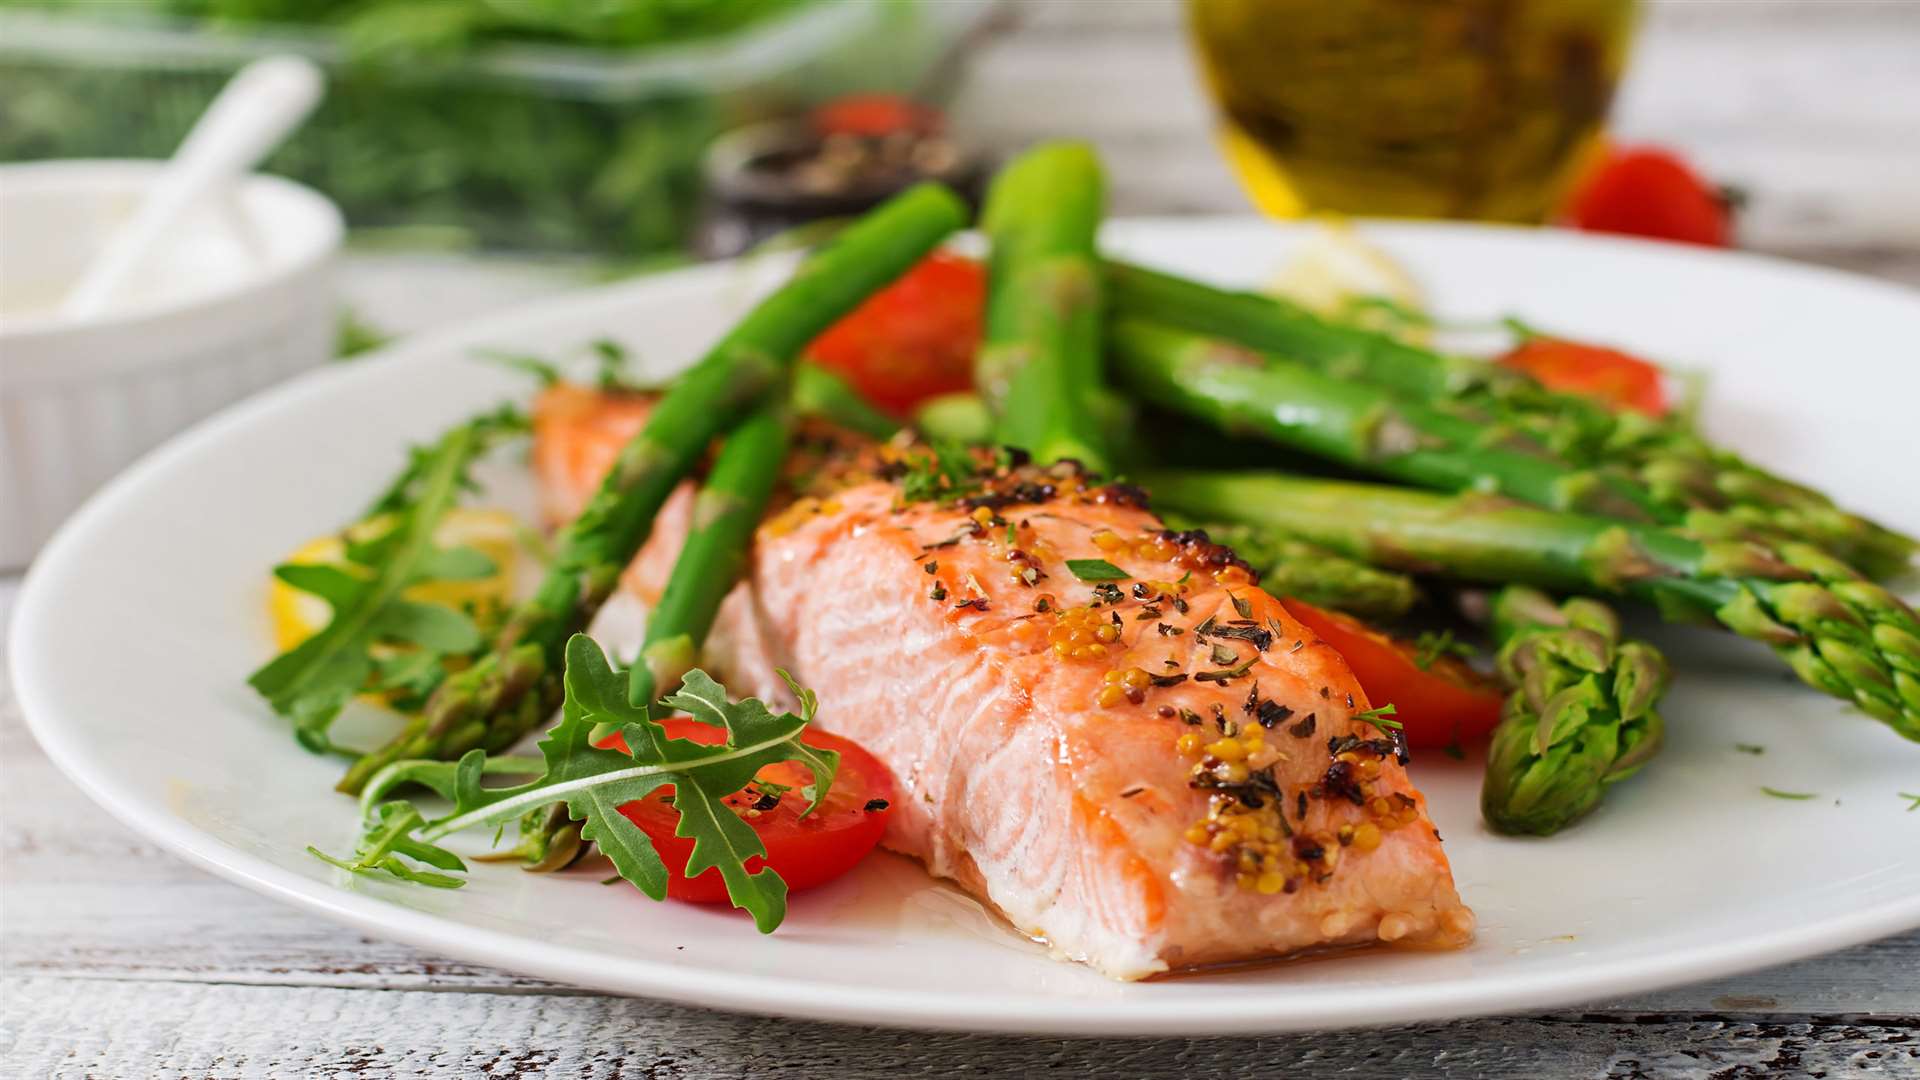 Pregnant women can safely have one portion of salmon, trout, mackerel or herring weekly